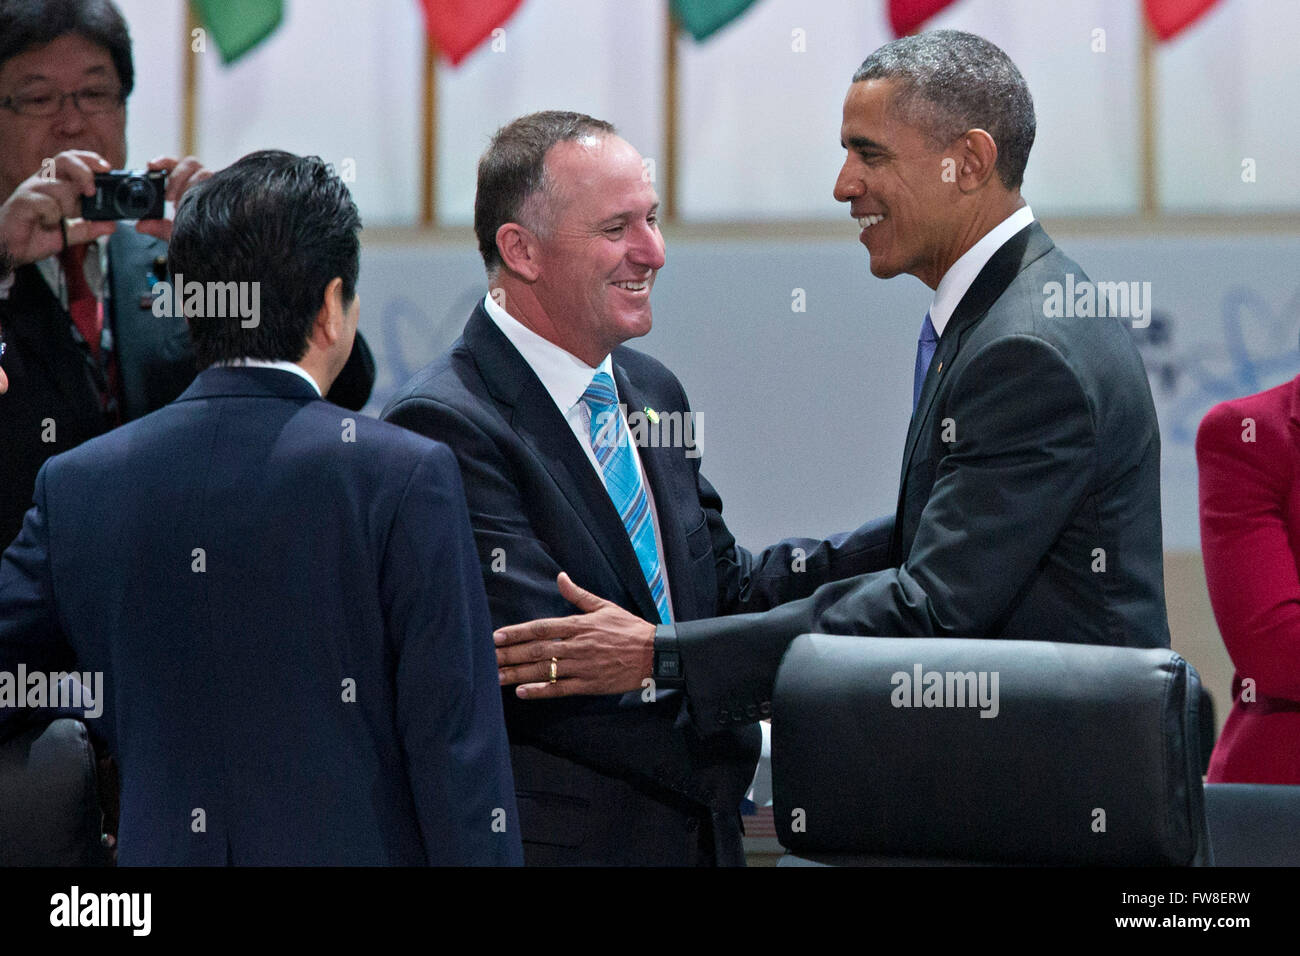 United States President Barack Obama left, shakes hands with John Key, New Zealand's prime minister, during an opening plenary entitled 'National Actions to Enhance Nuclear Security' at the Nuclear Security Summit in Washington, DC, U.S., on Friday, April 1, 2016. After a spate of terrorist attacks from Europe to Africa, Obama is rallying international support during the summit for an effort to keep Islamic State and similar groups from obtaining nuclear material and other weapons of mass destruction. Credit: Andrew Harrer/Pool via CNP - NO WIRE SERVICE - Stock Photo